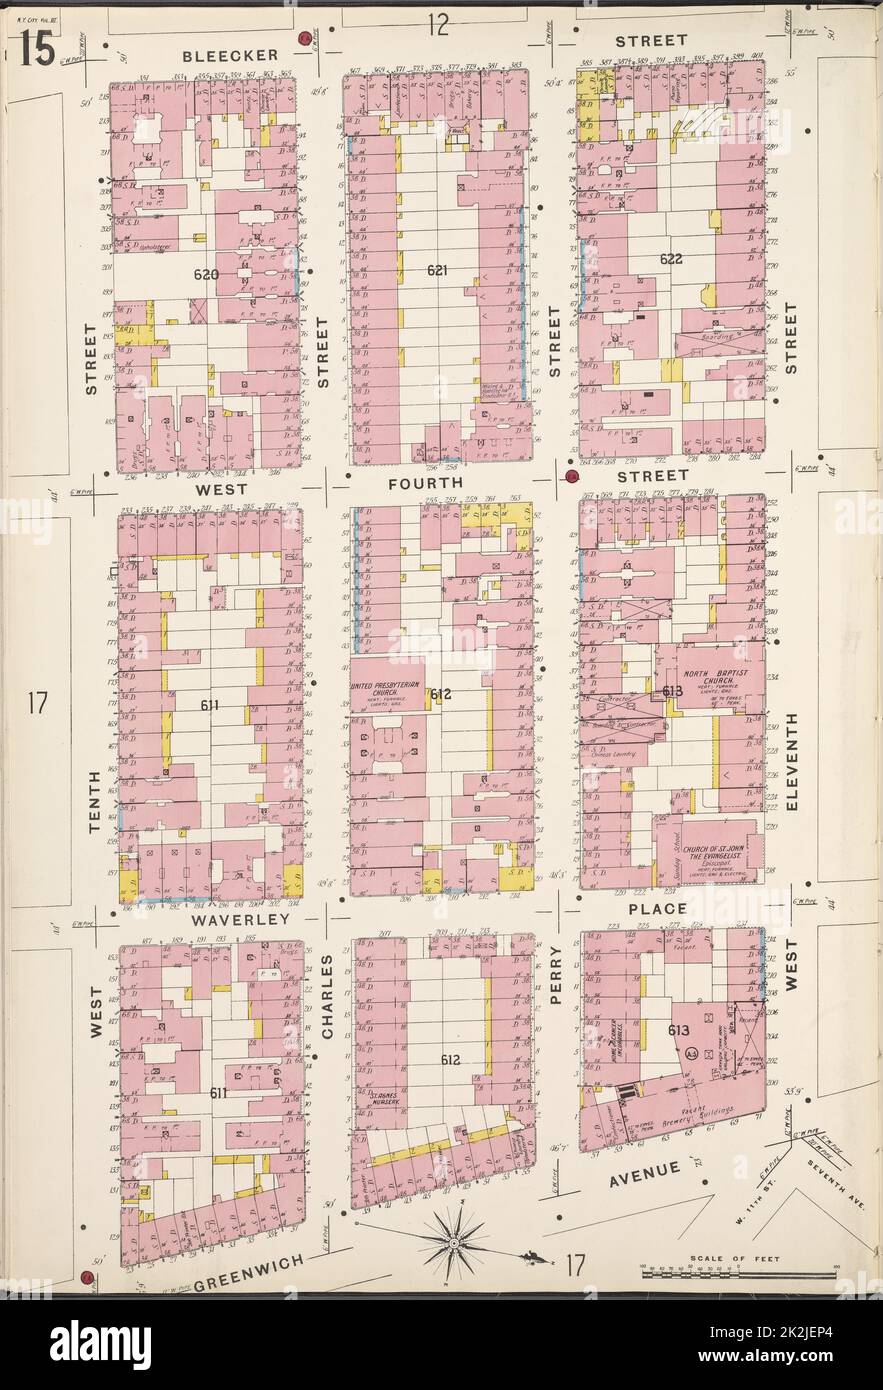 Cartographic, Maps. 1884 - 1936. Lionel Pincus and Princess Firyal Map Division. Fire insurance , New York (State), Real property , New York (State), Cities & towns , New York (State) Manhattan, V. 3, Plate No. 15 Map bounded by Bleecker St., W. 11th St., Greenwich Ave., W. 10th St. Stock Photo